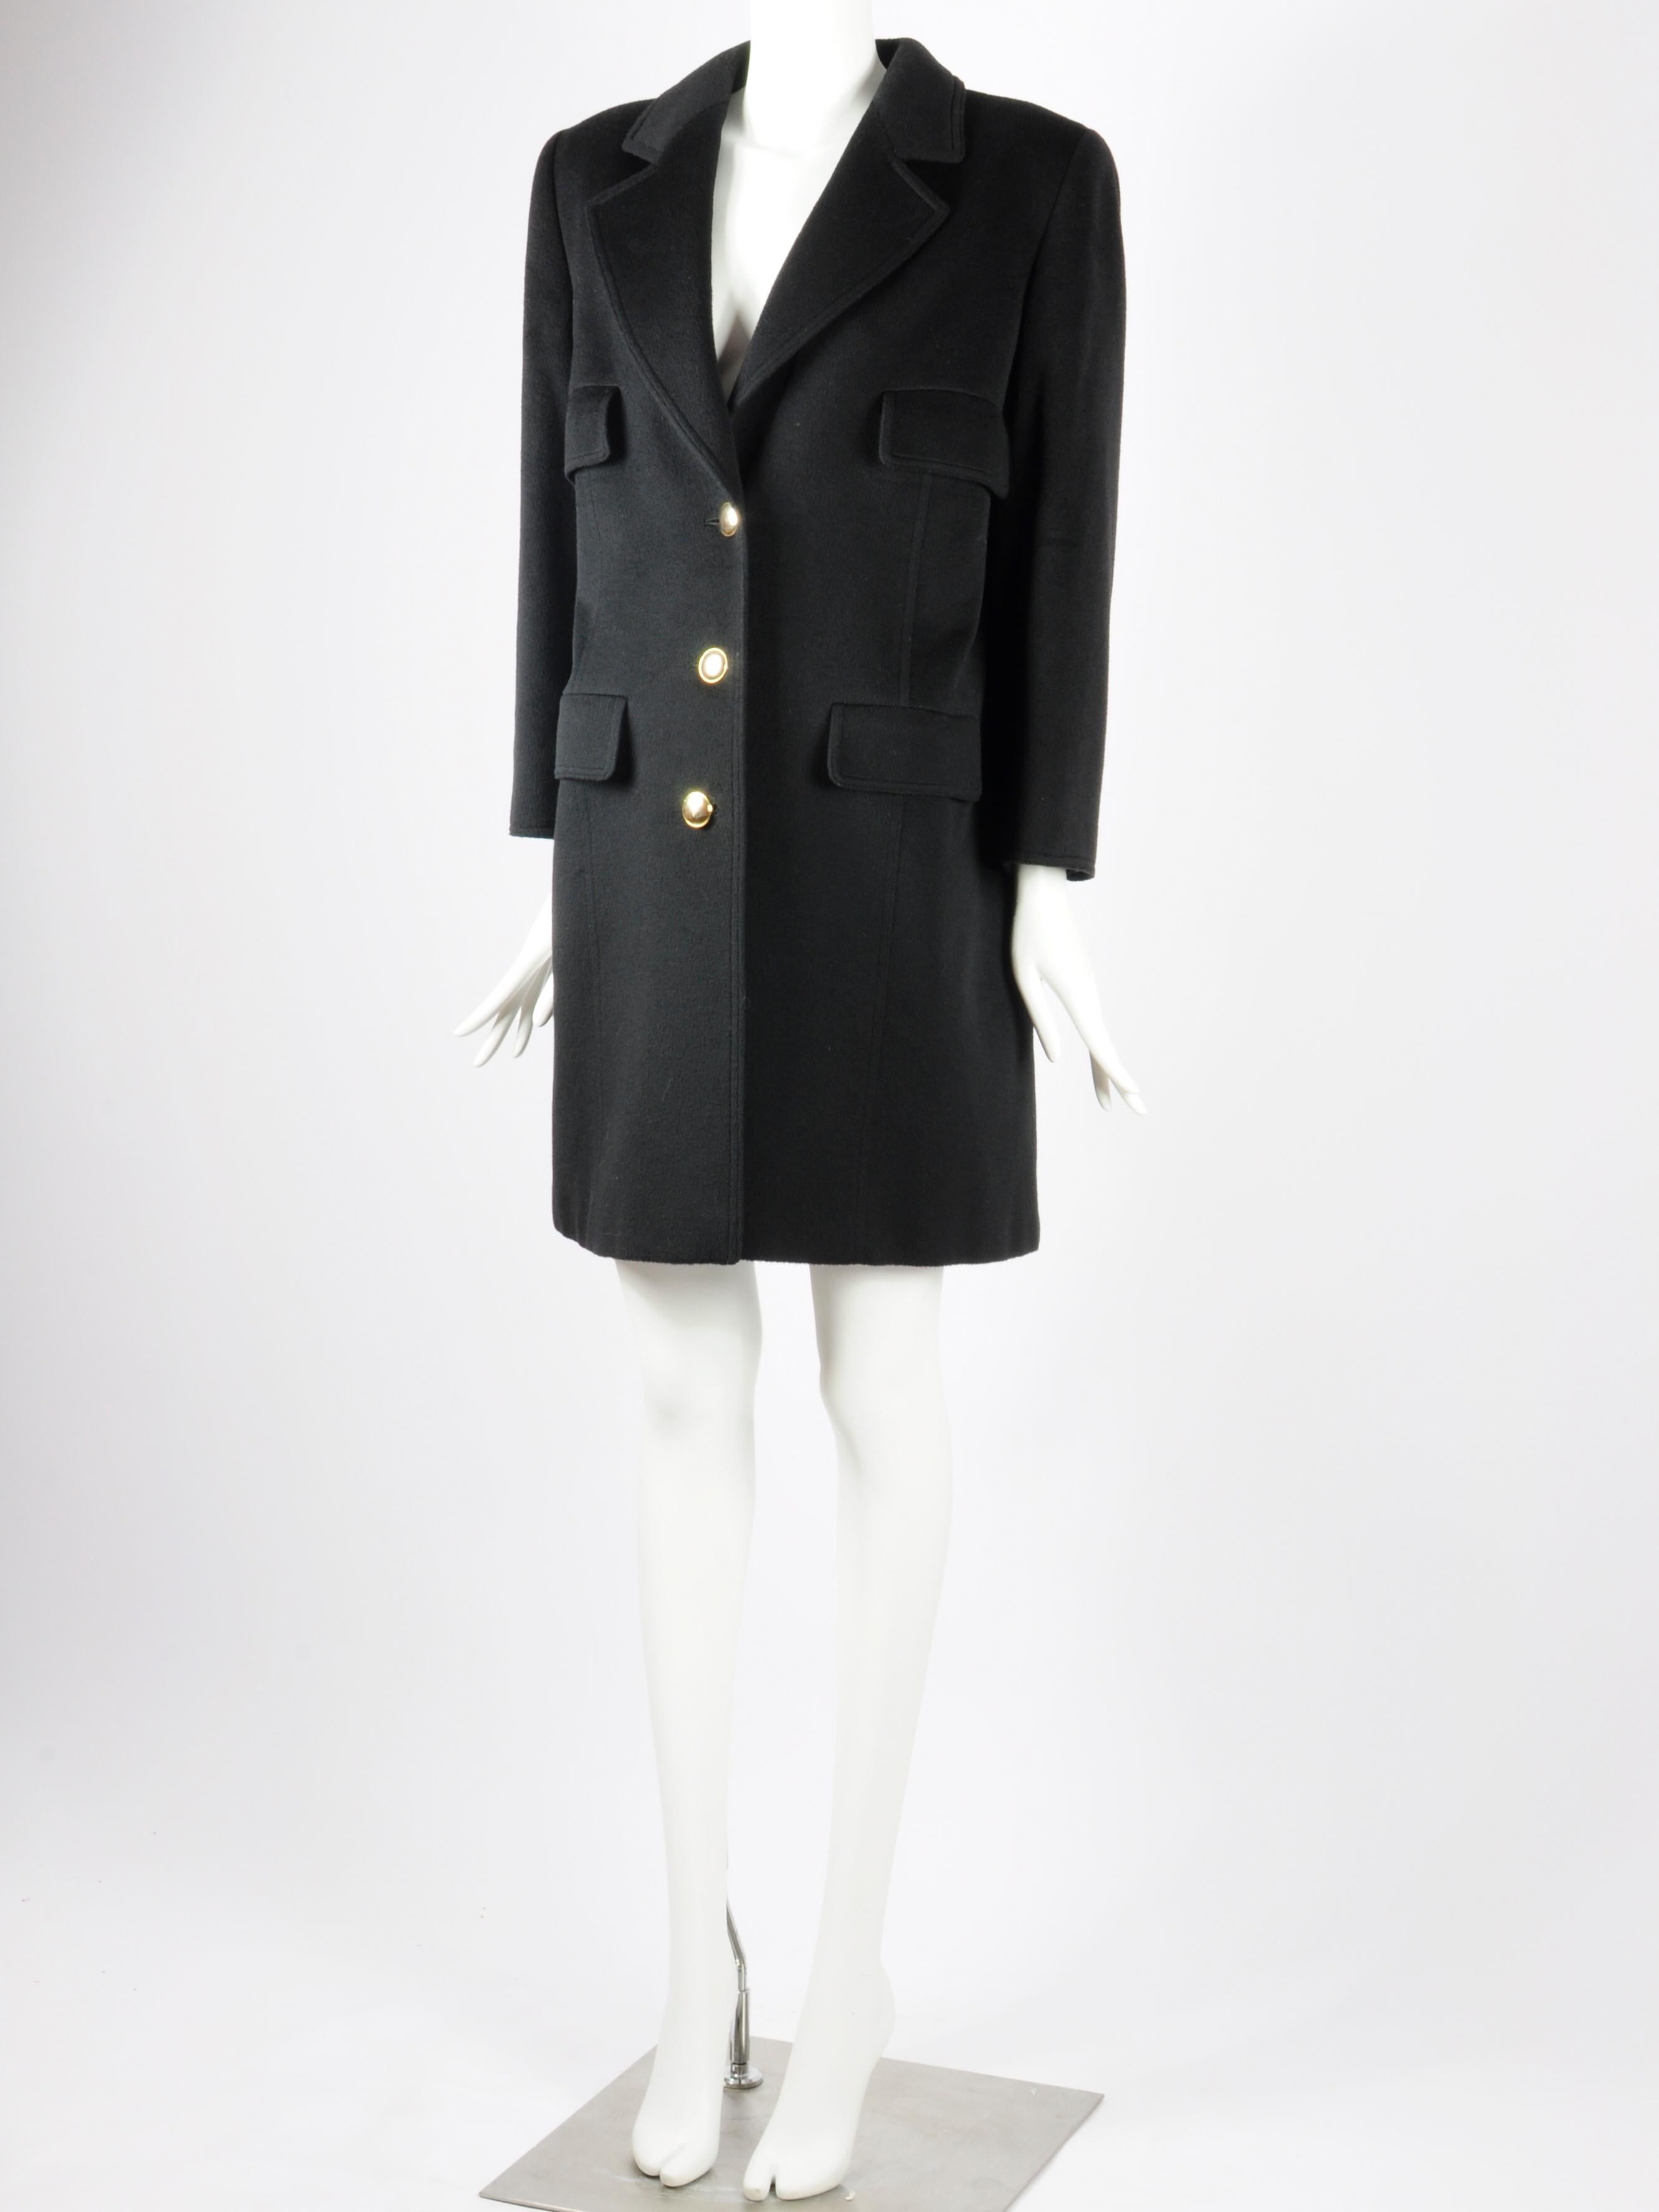 Valentino Miss V 1990s black coat in wool and cashmere with golden buttons. A single breasted cashmere Valentino coat with gold coloured buttons. It features very feminine tailoring, soft cashmere/wool blend fabric and four (faux) pockets on the